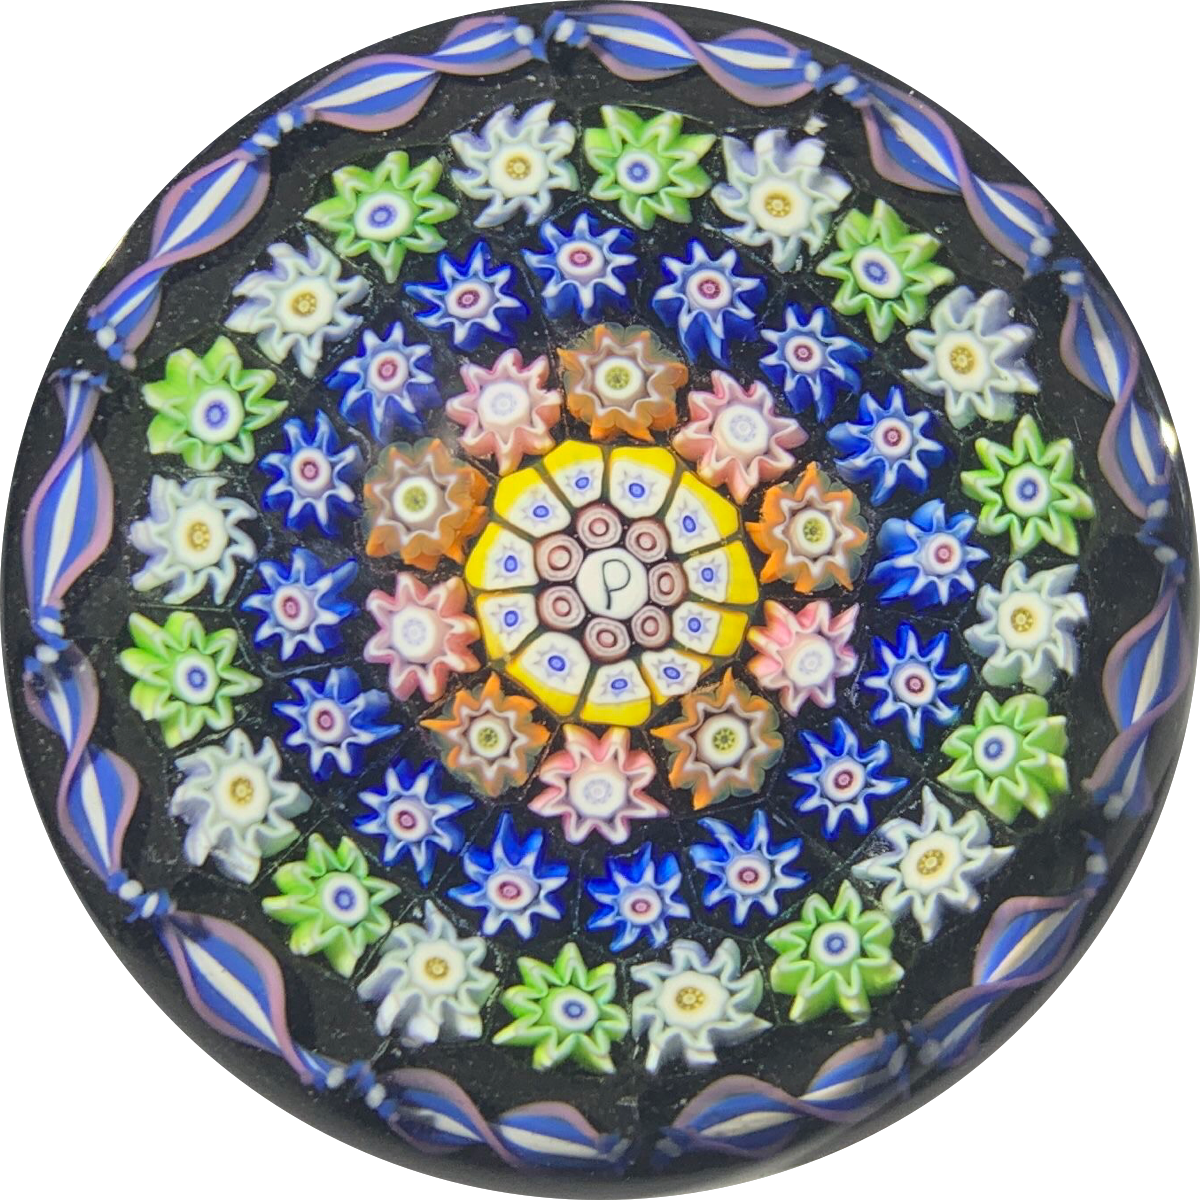 Vintage Perthshire Paperweights PP123 Miniature Concentric Millefiori on Opaque Black